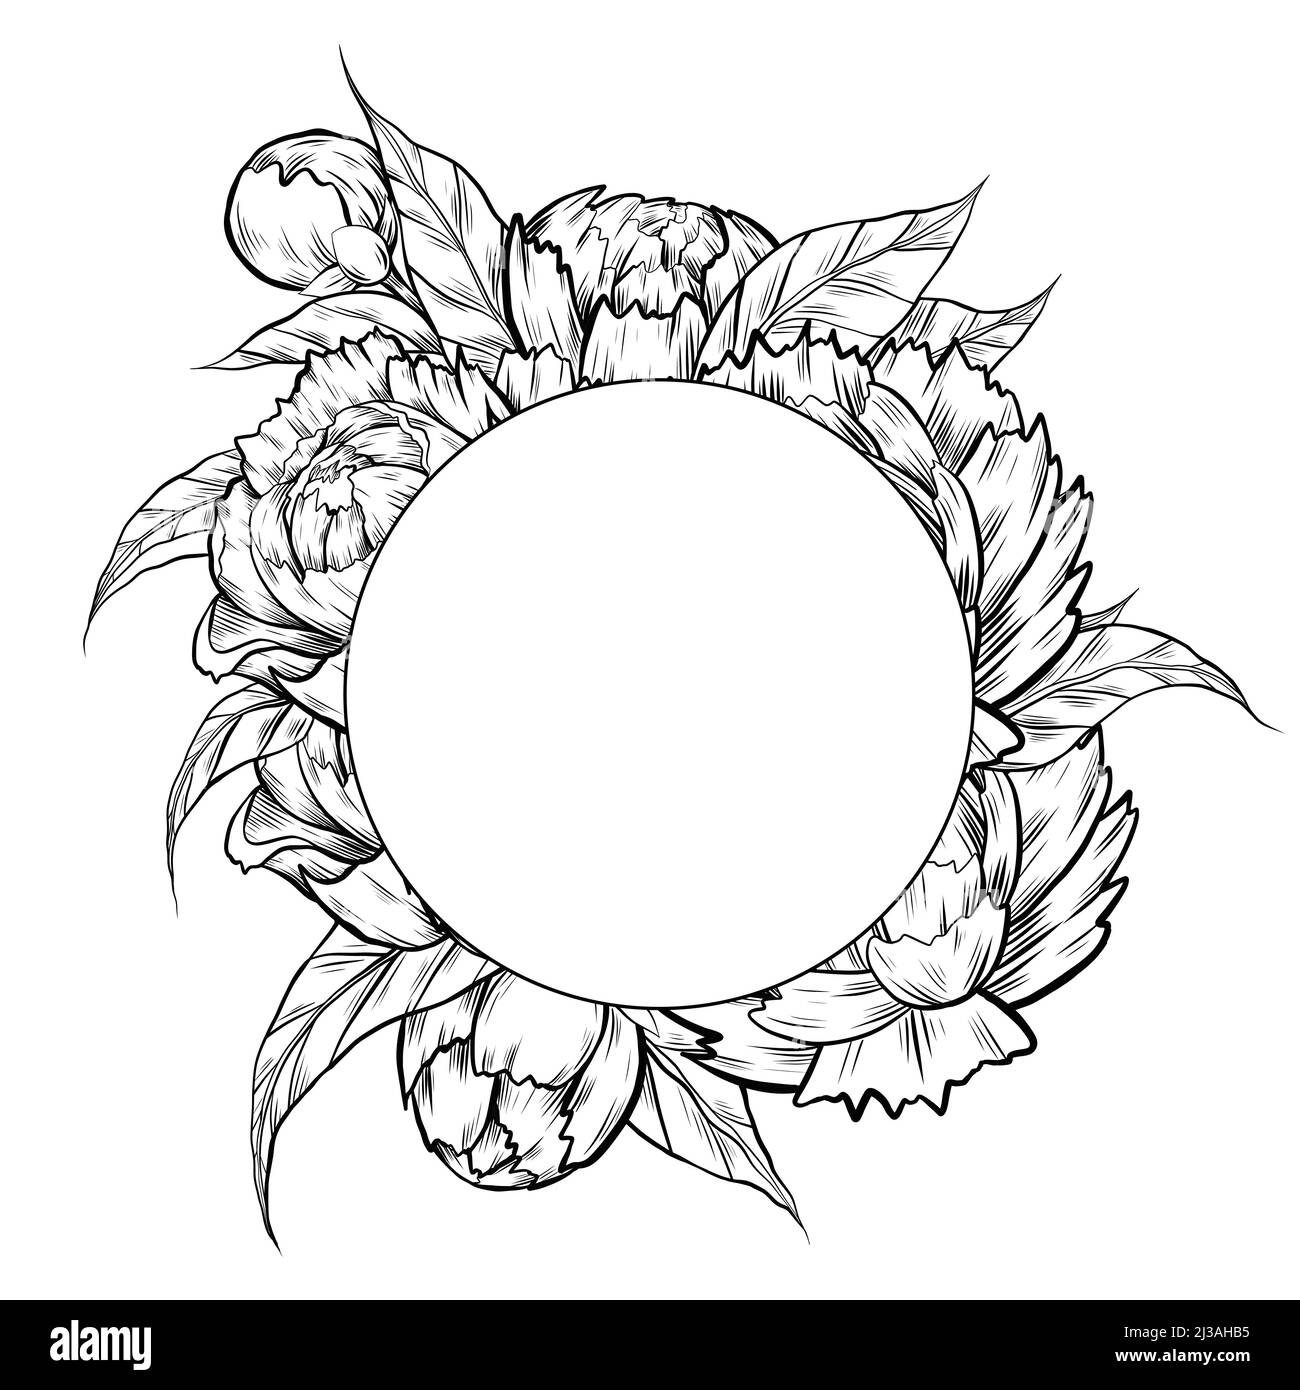 Vector round frame with sketch peony flowers with foliage, hatching and copy space. Contour natural circle border with floral bouquet Stock Vector